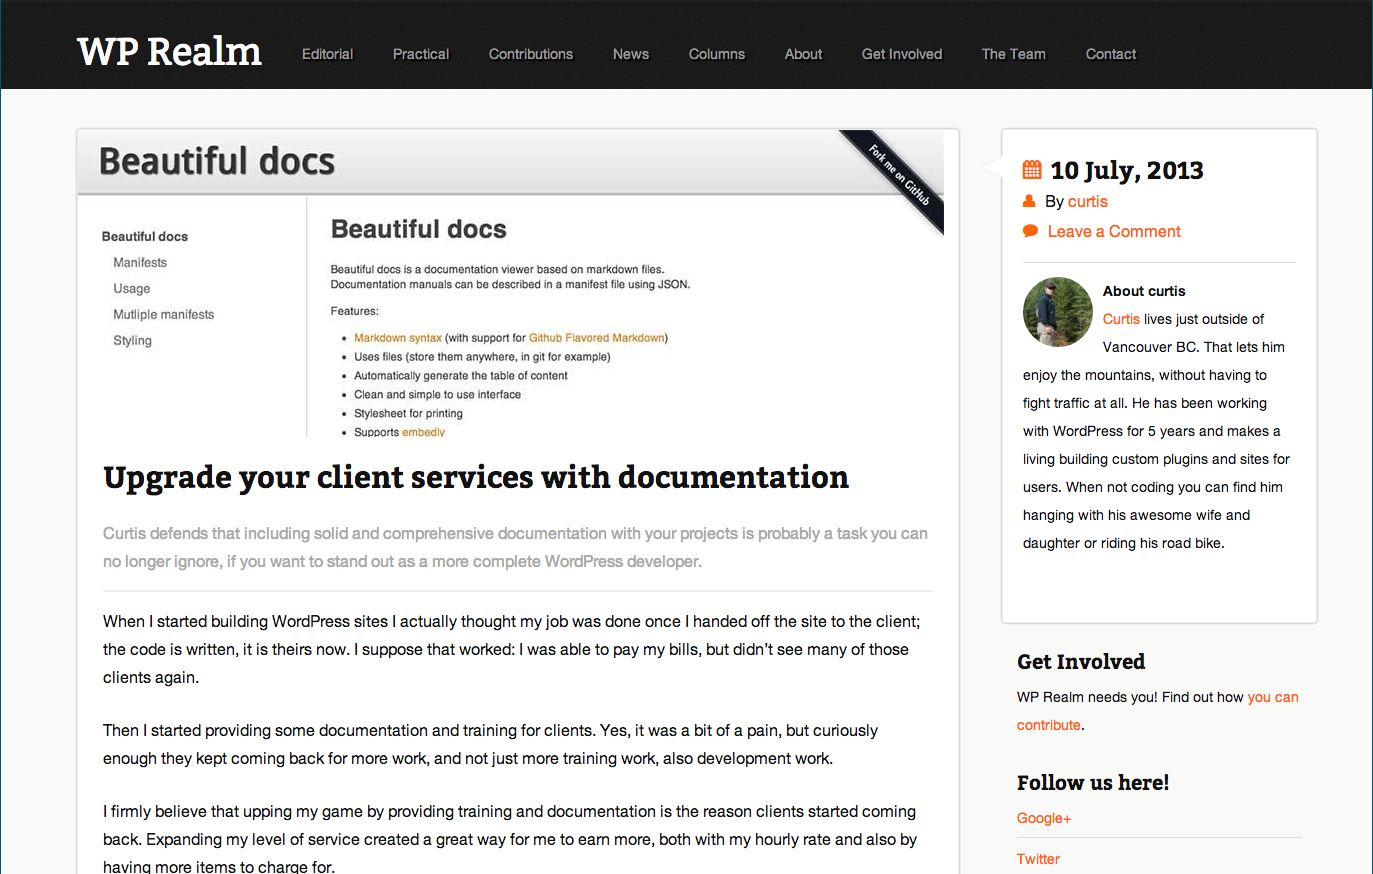 New post on WP Realm: Upgrade your client services with documentation